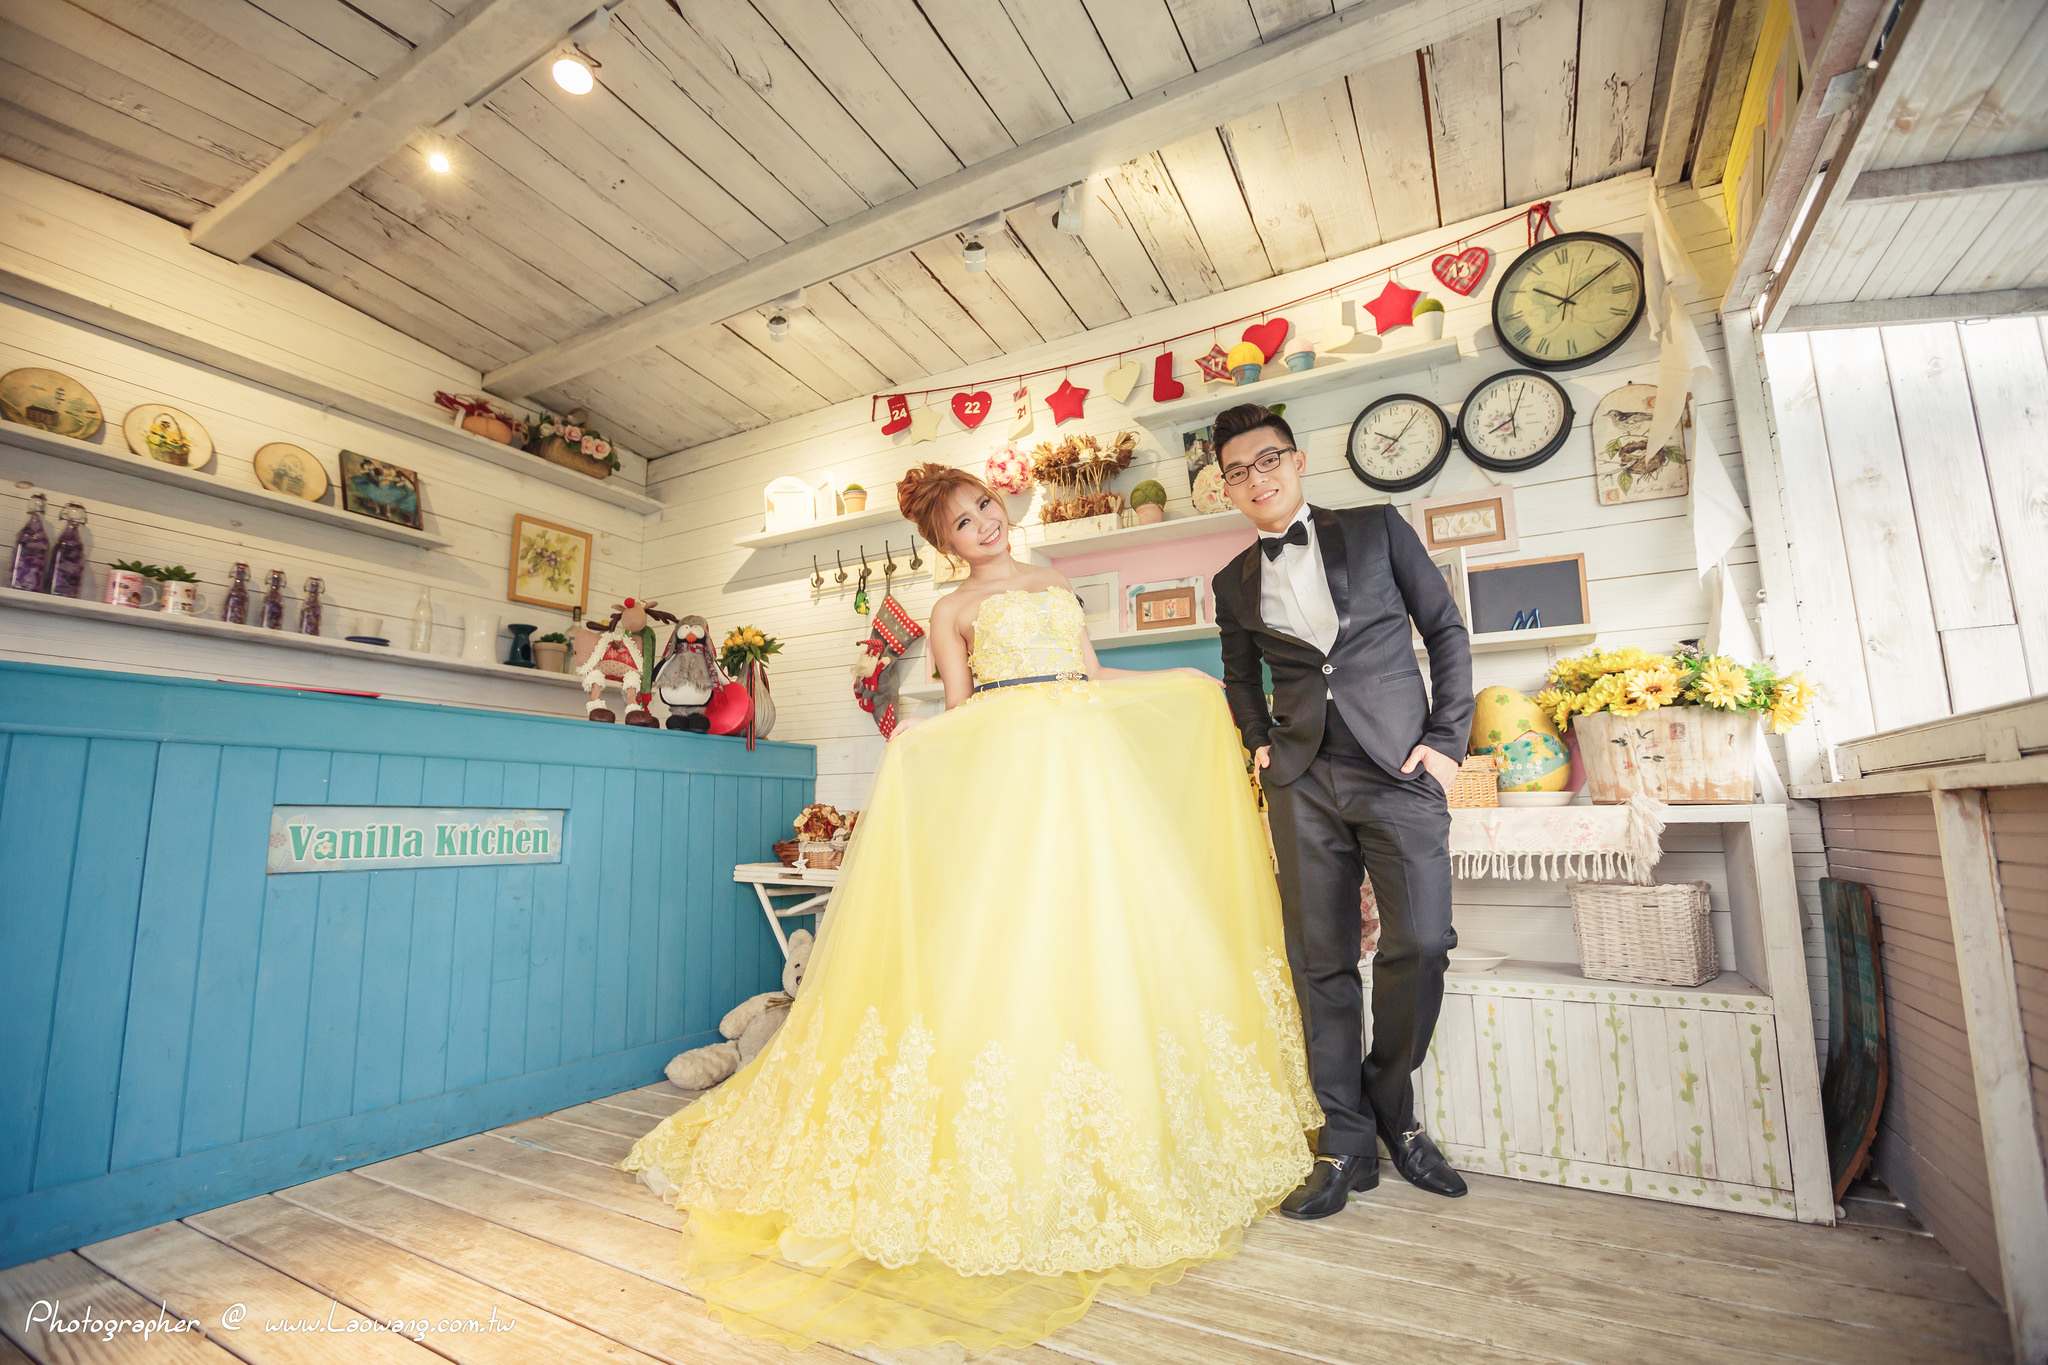 wedding photography12 The Best Wedding Photography Ideas by Lao Wang